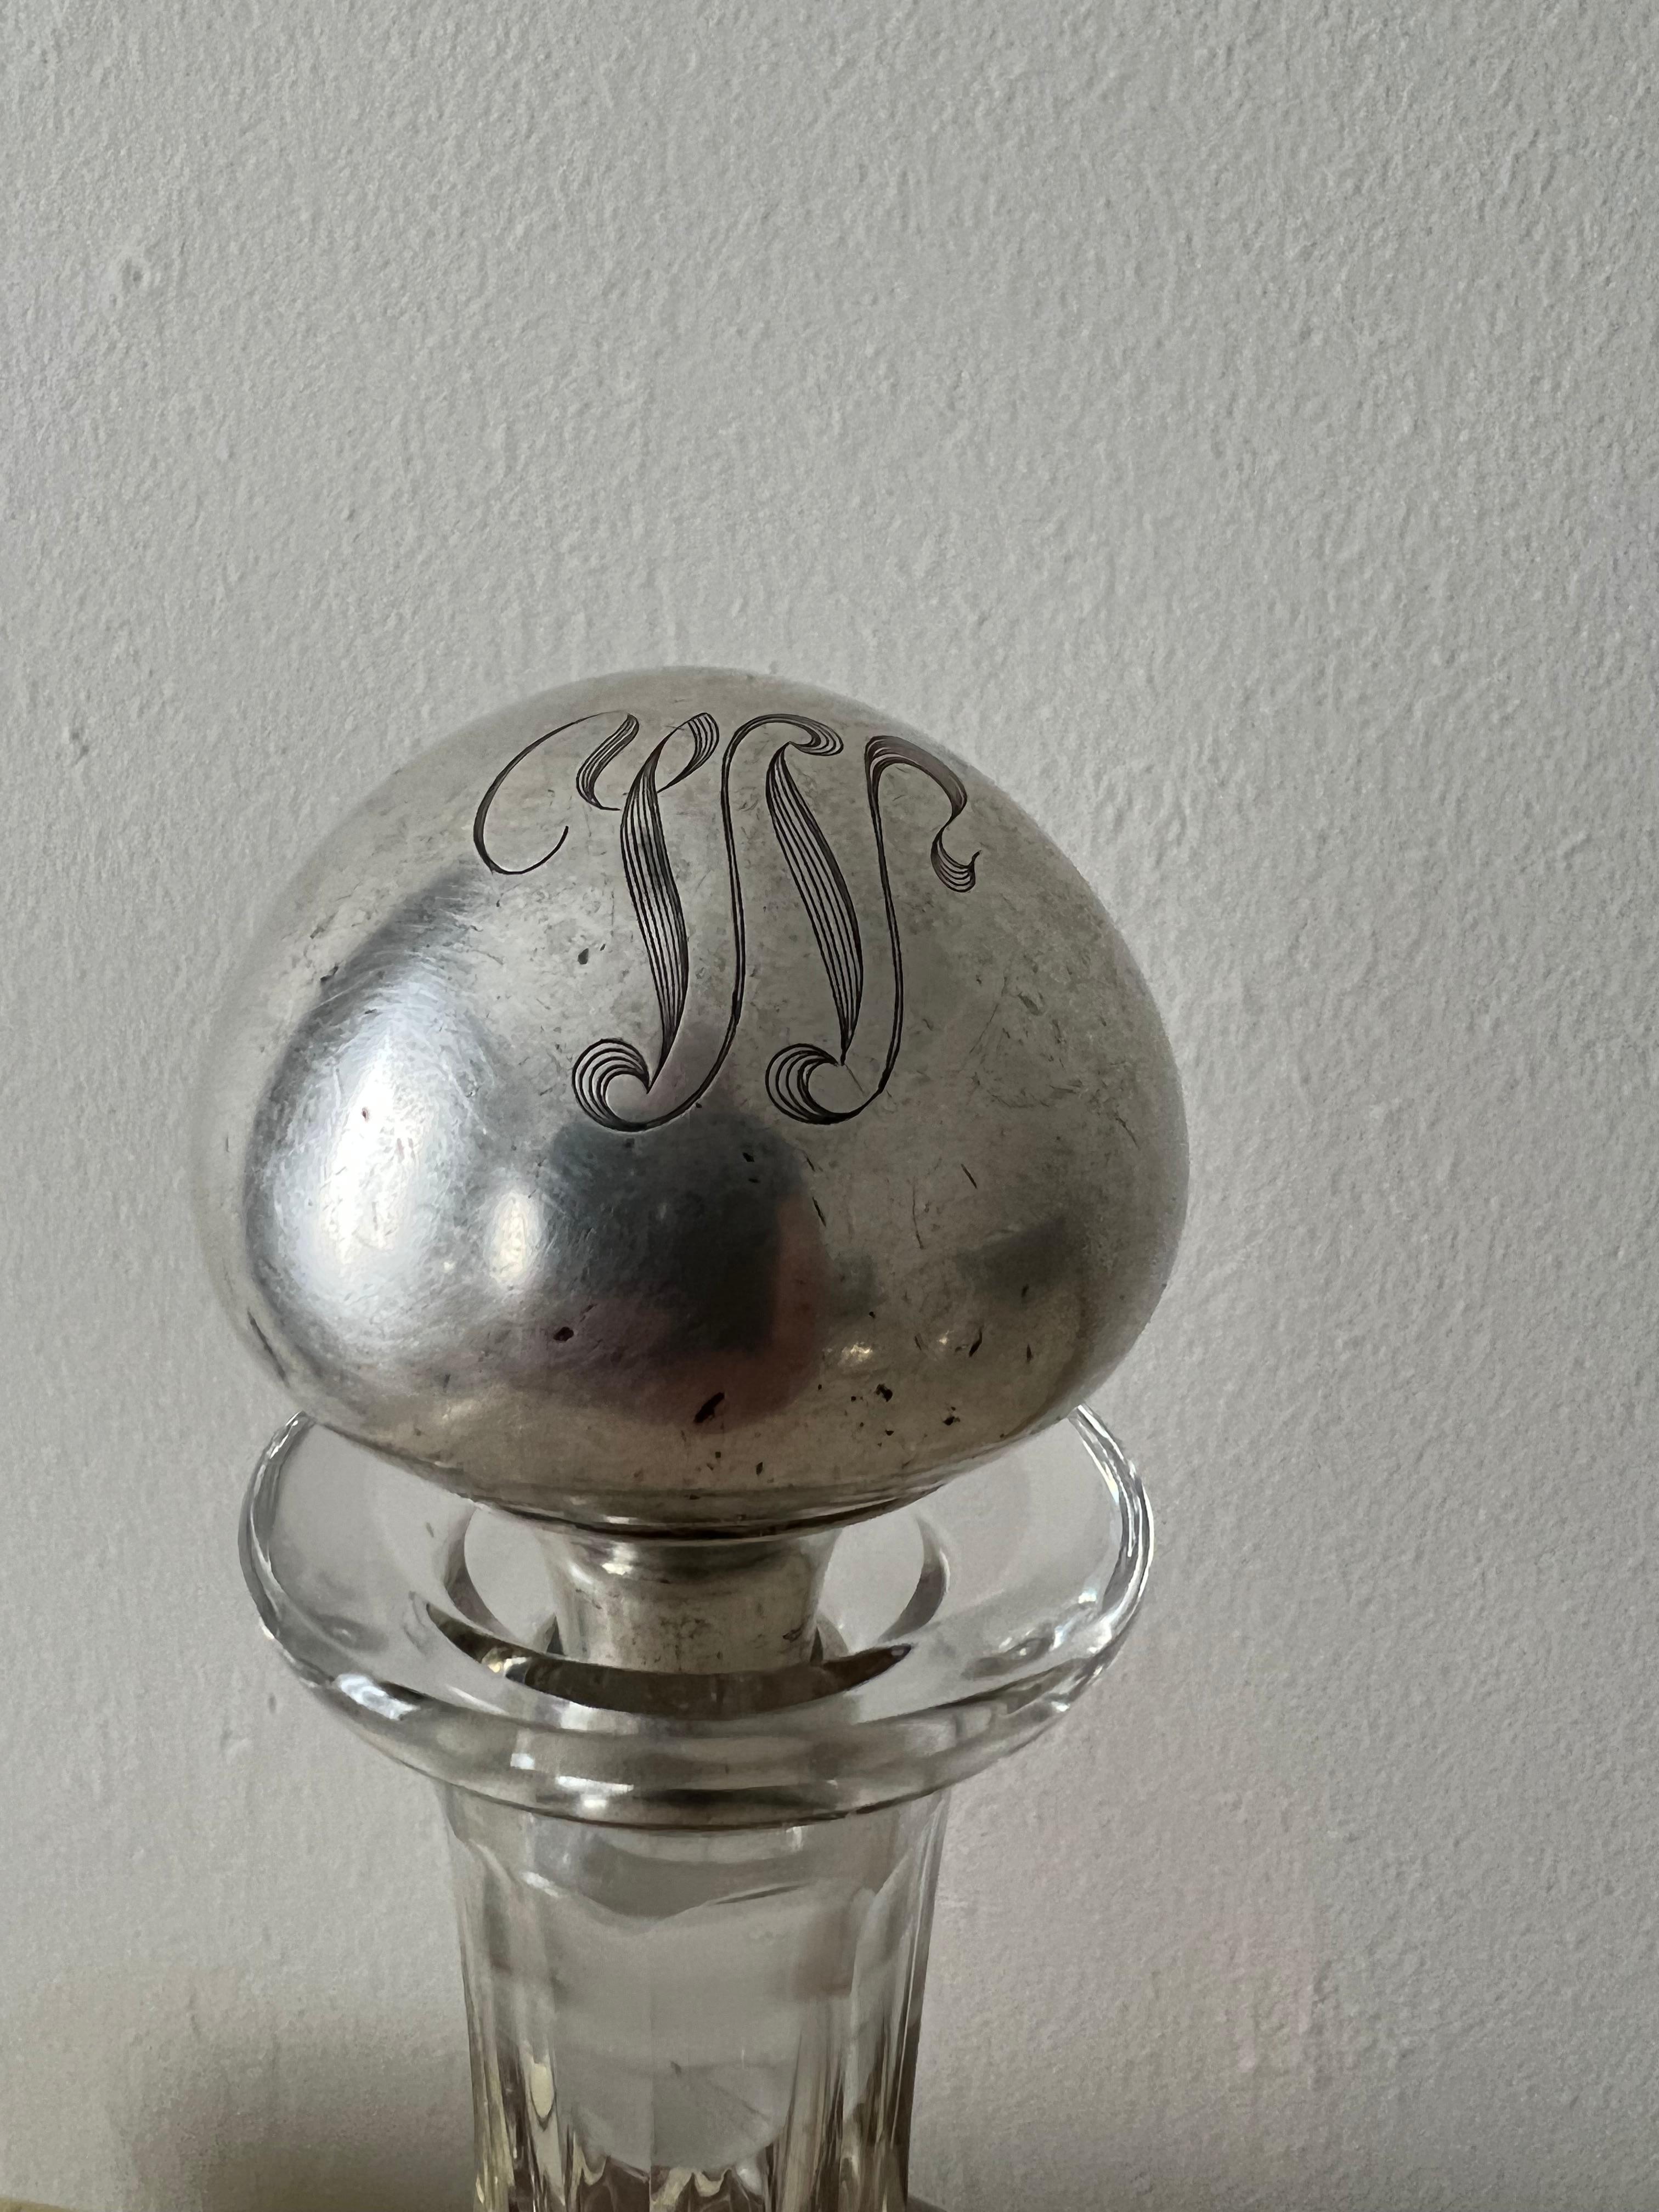 Sterling silver bottle stopper. Monogrammed with the letter W. The piece is wonderfully patinated from decades of unleashing spirits.